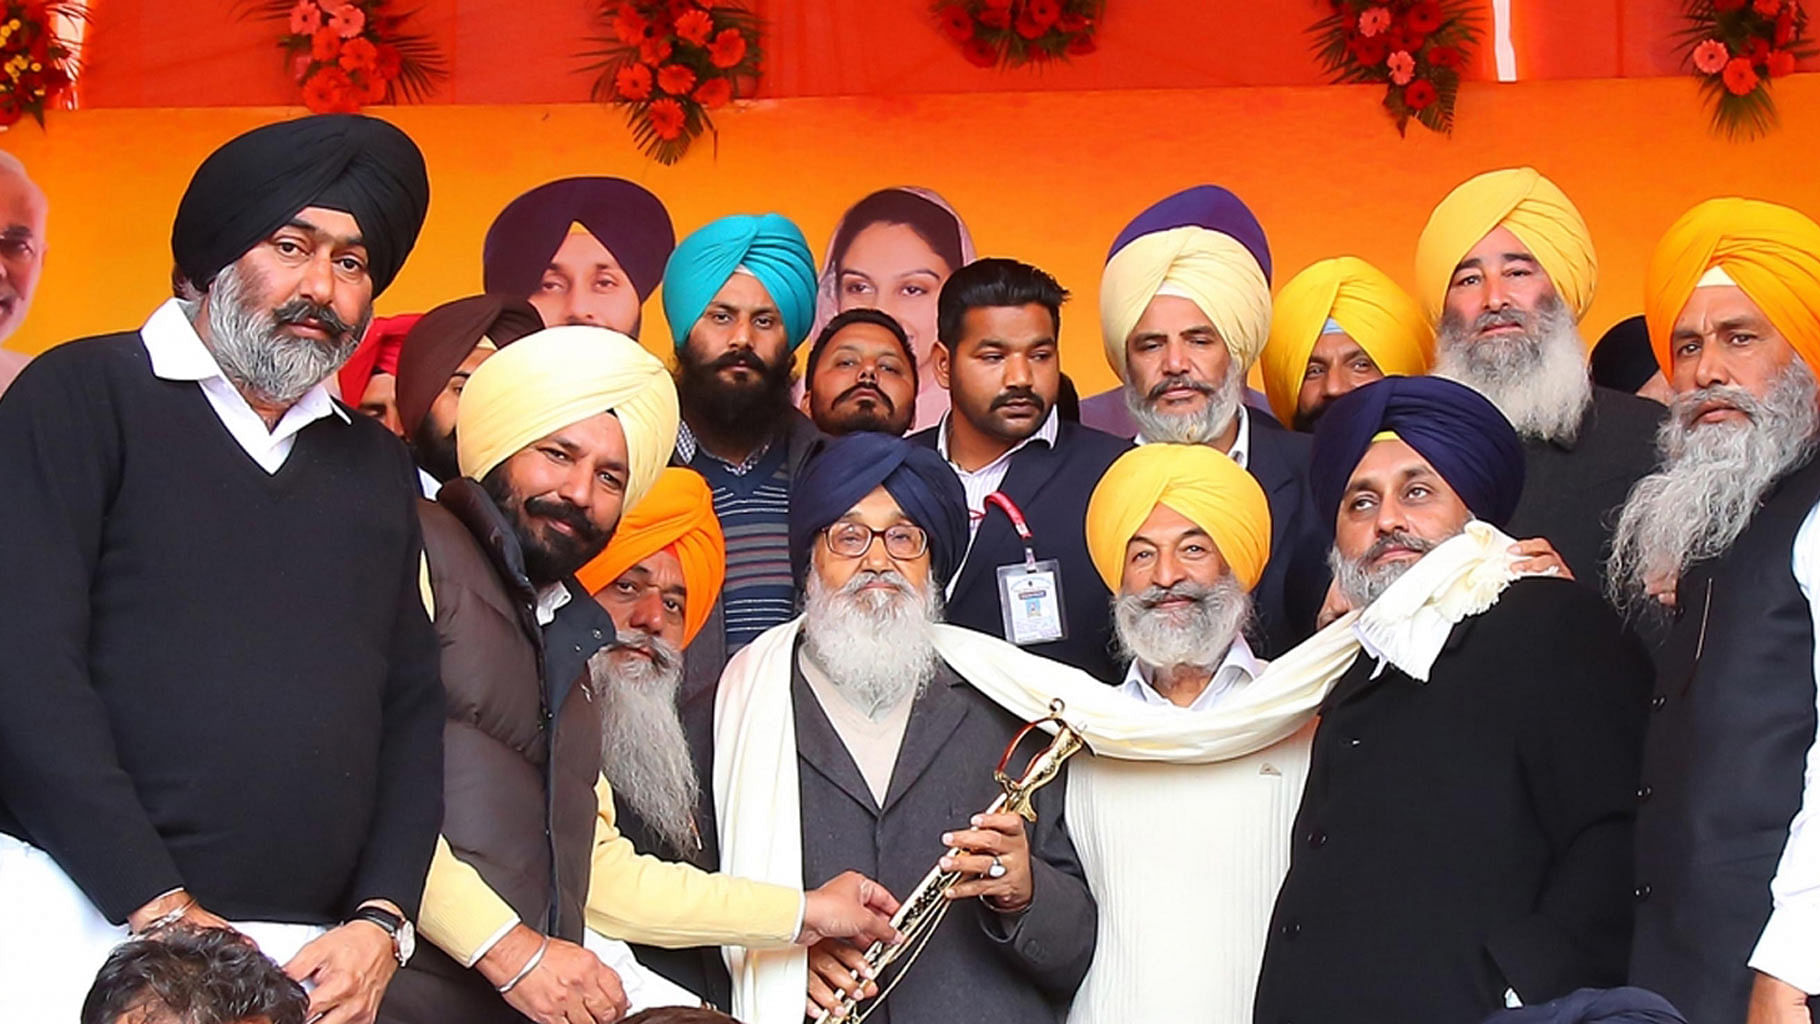 Punjab Chief Minister Parkash Singh Badal (centre) and Deputy Chief Minister (second from right) Sukhbir Singh Badal during a Shiromani Akali Dal rally in Muktsar on January 14 2016. (Photo: IANS)